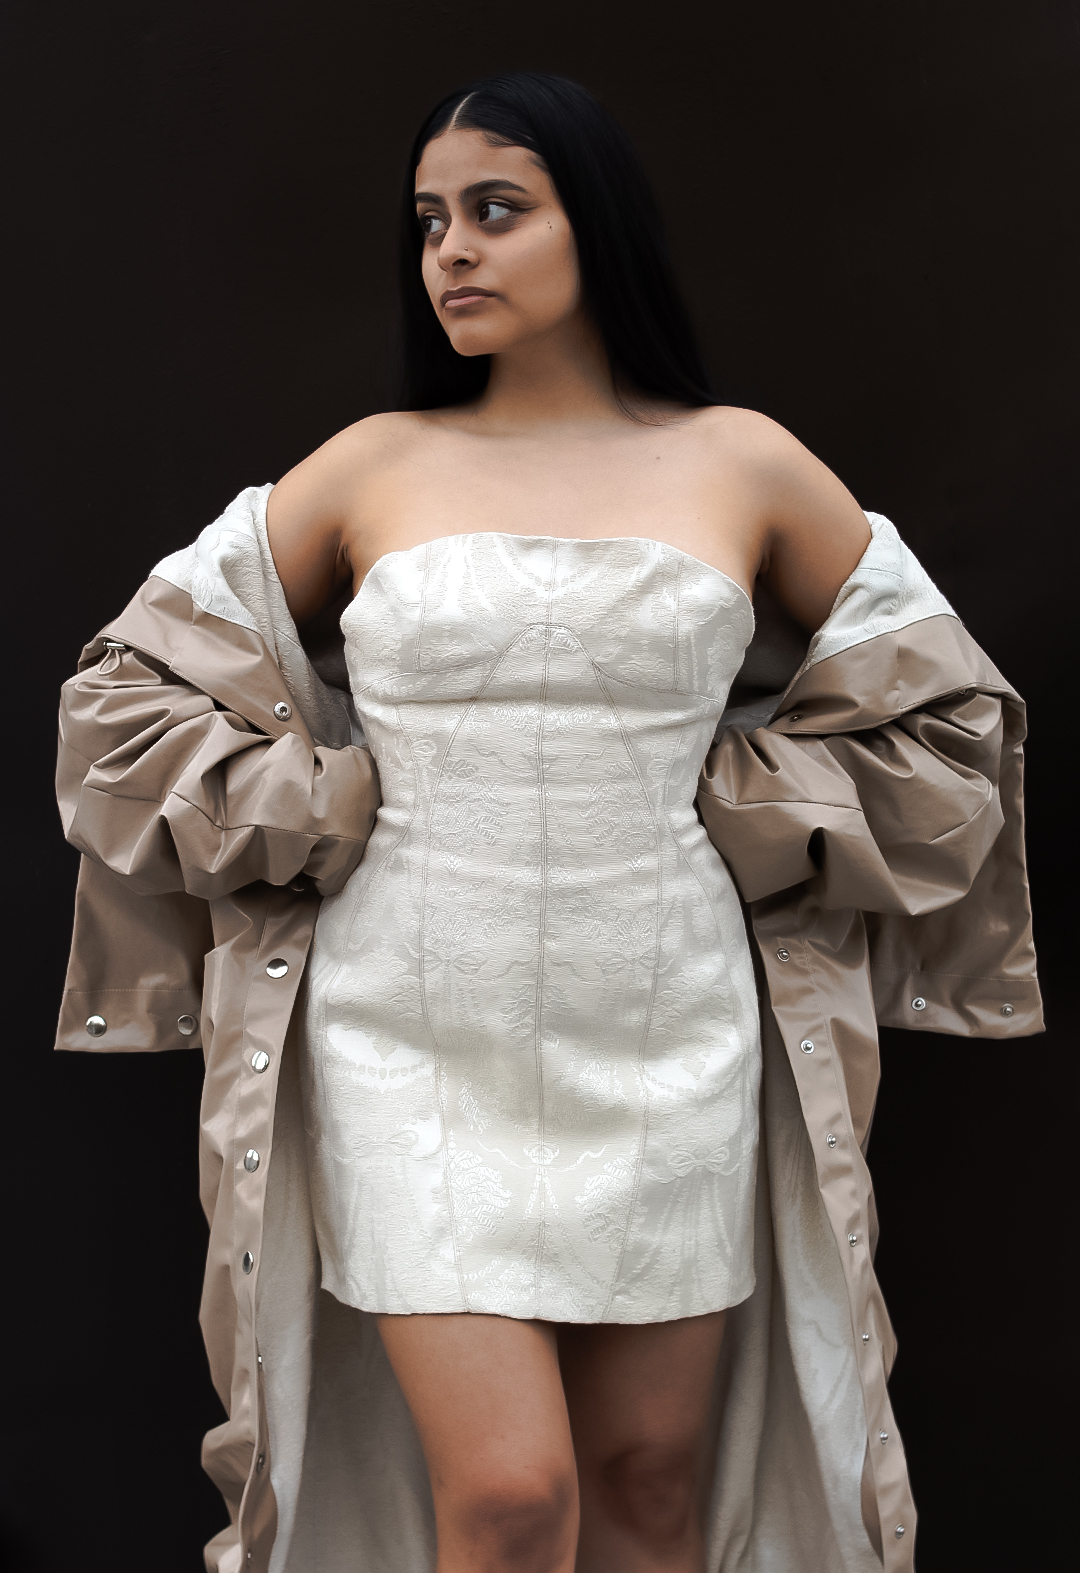 The model is wearing an upholstery jacquard strapless dress with detailed seams and topstitch; the dress matches the coat’s lining.